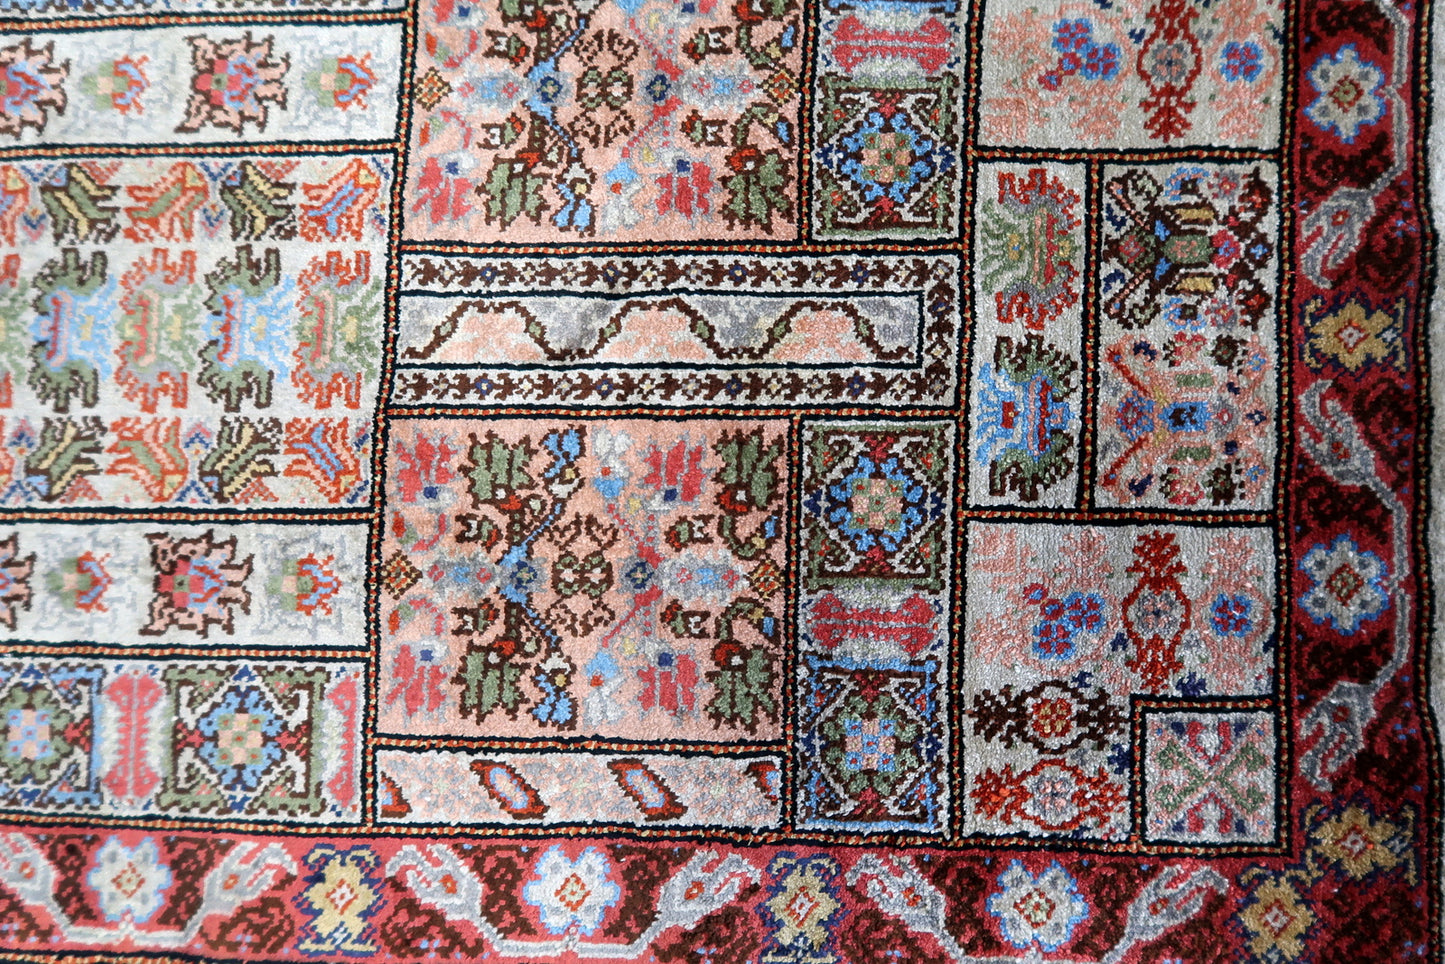 Overhead shot of the Tunisian silk rug displaying its rich, deep red color